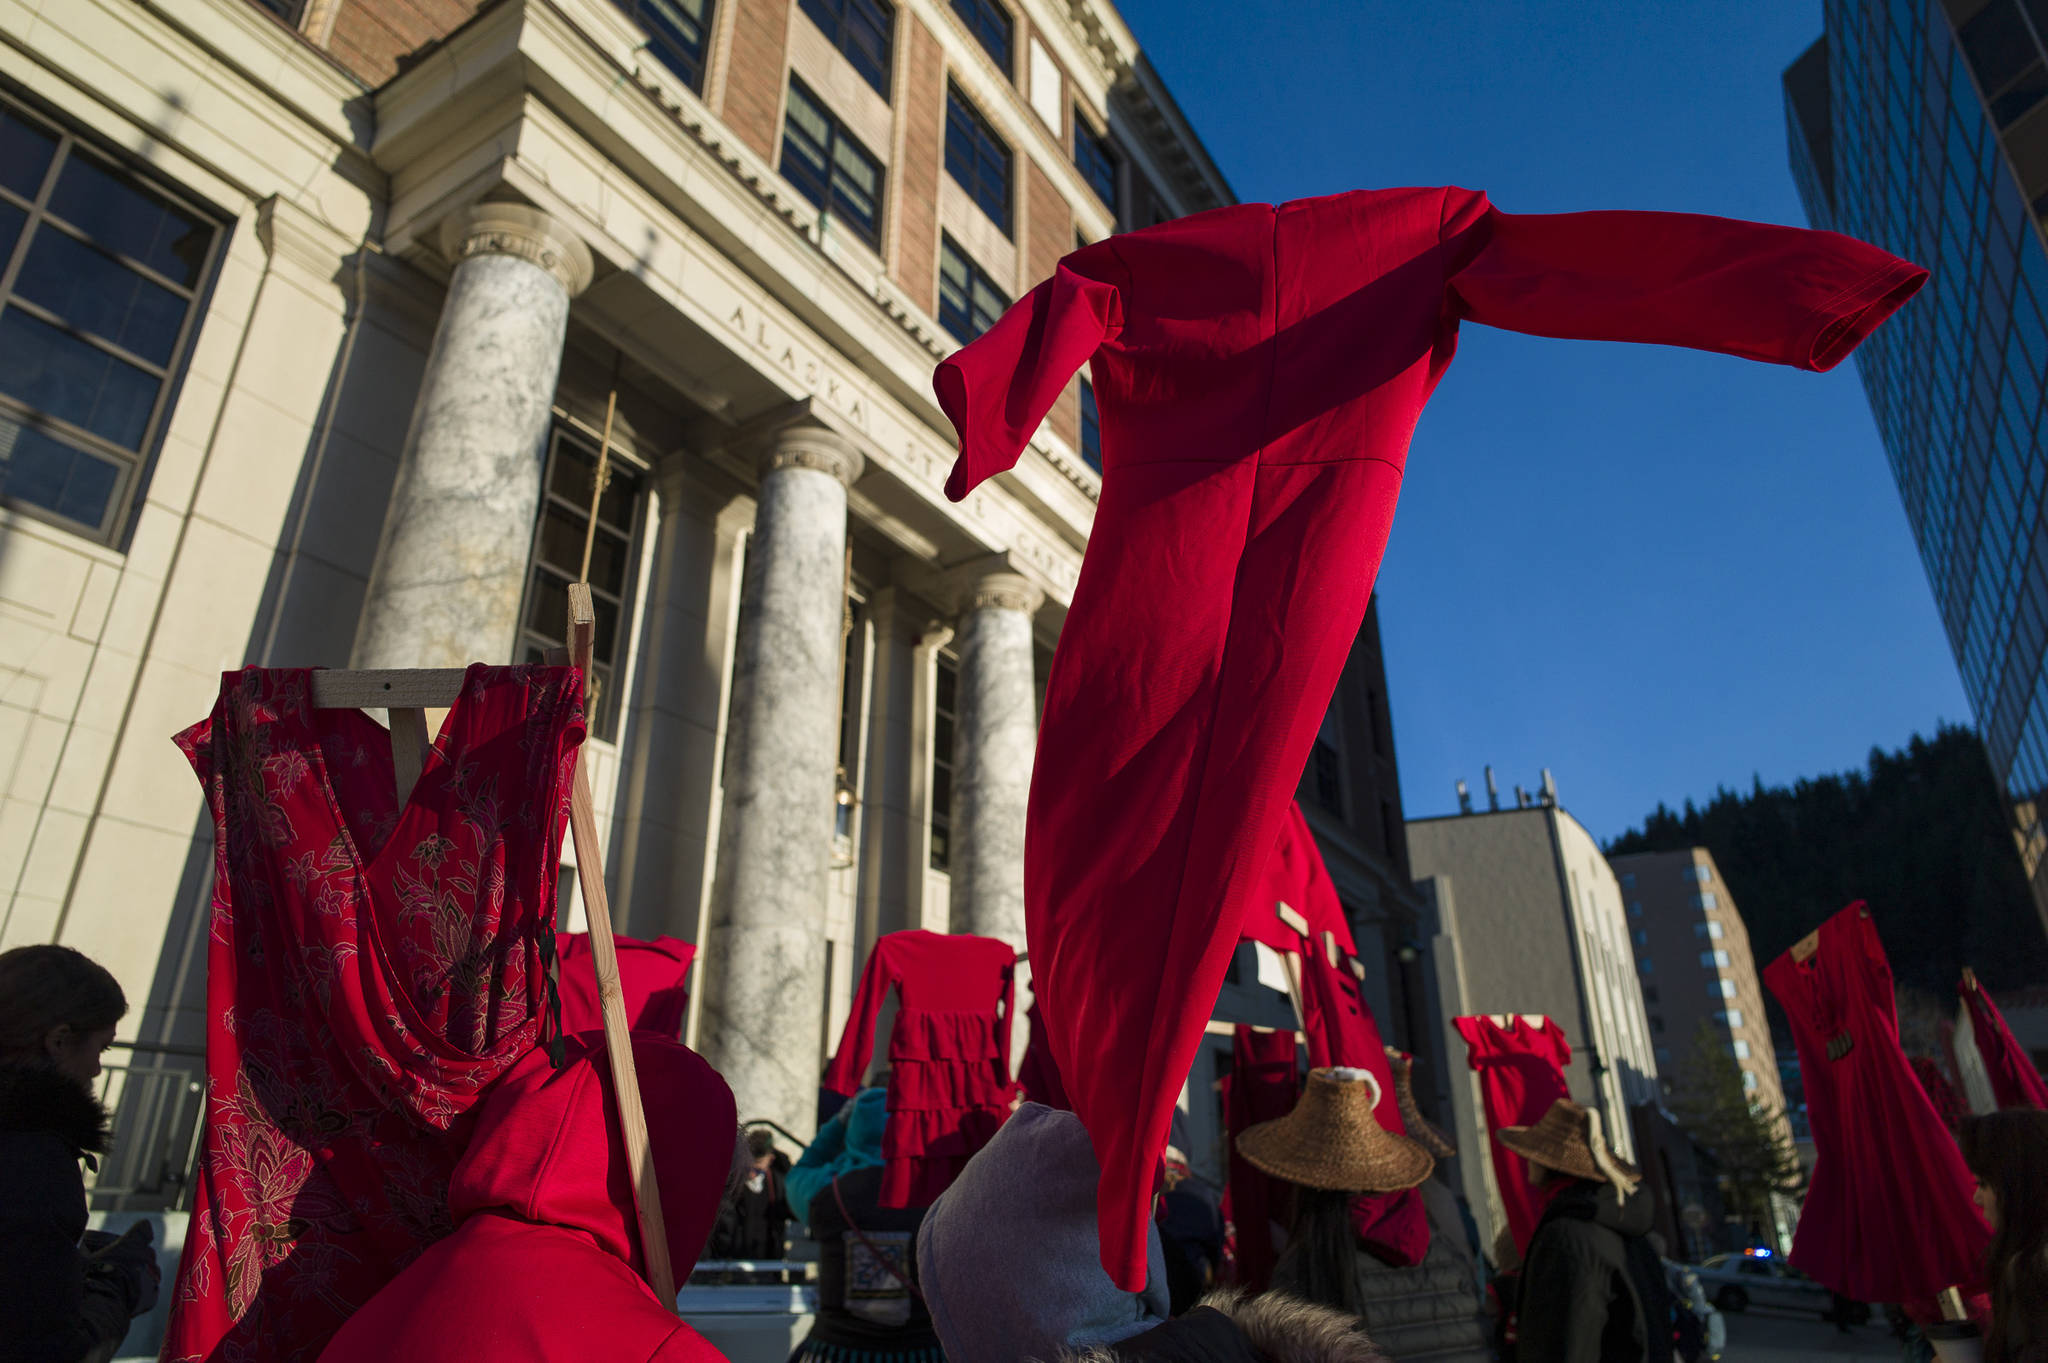 Native women hold up red dresses to symbolize missing and murdered indigenous women during the Women’s March on Juneau in front of the Alaska State Capitol on Saturday, Jan. 19, 2019. (Michael Penn | Juneau Empire)